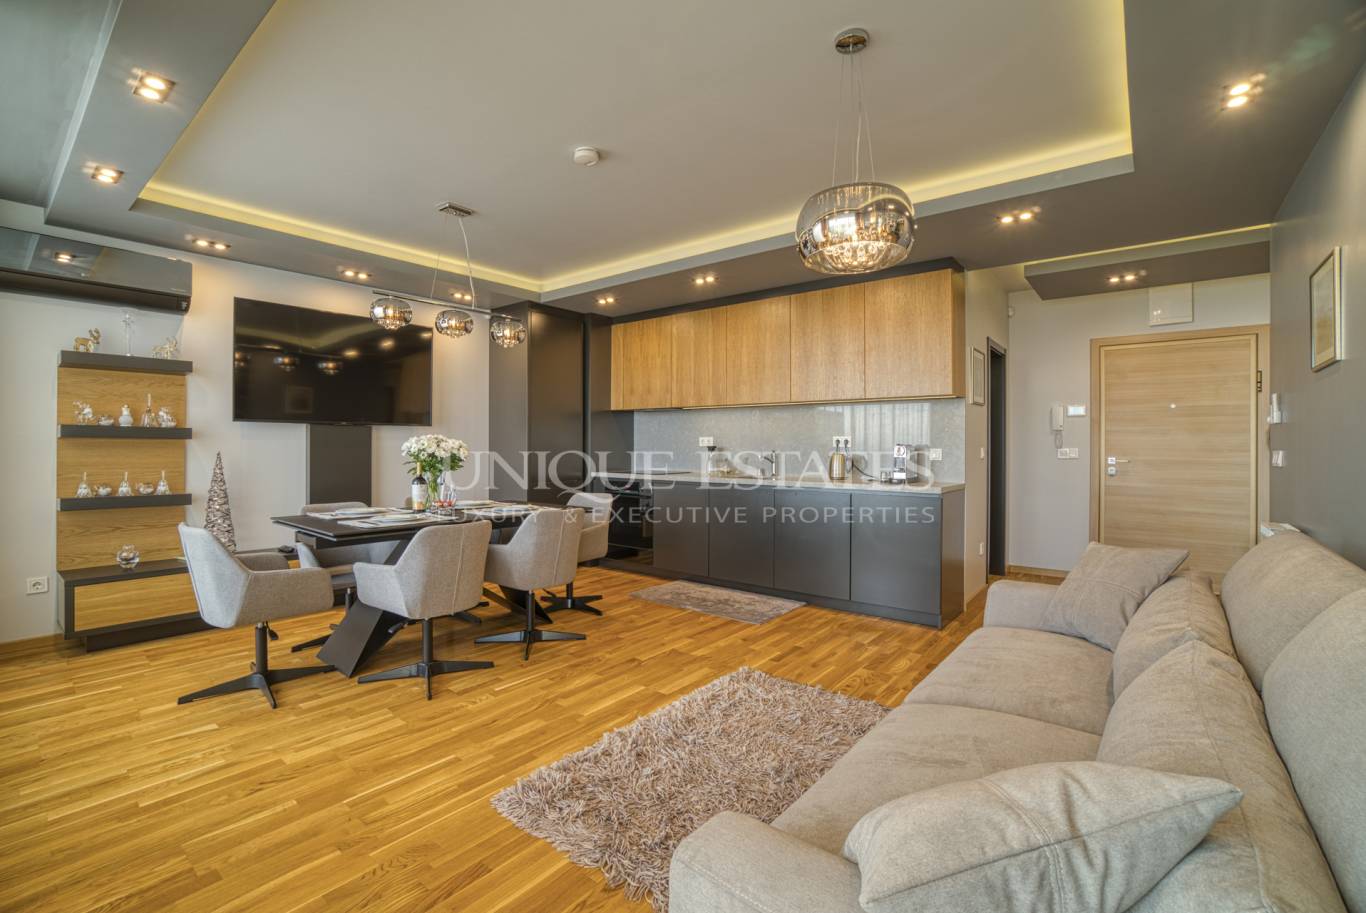 Apartment for sale in Sofia, Bulgaria Blvd with listing ID: E12623 - image 3